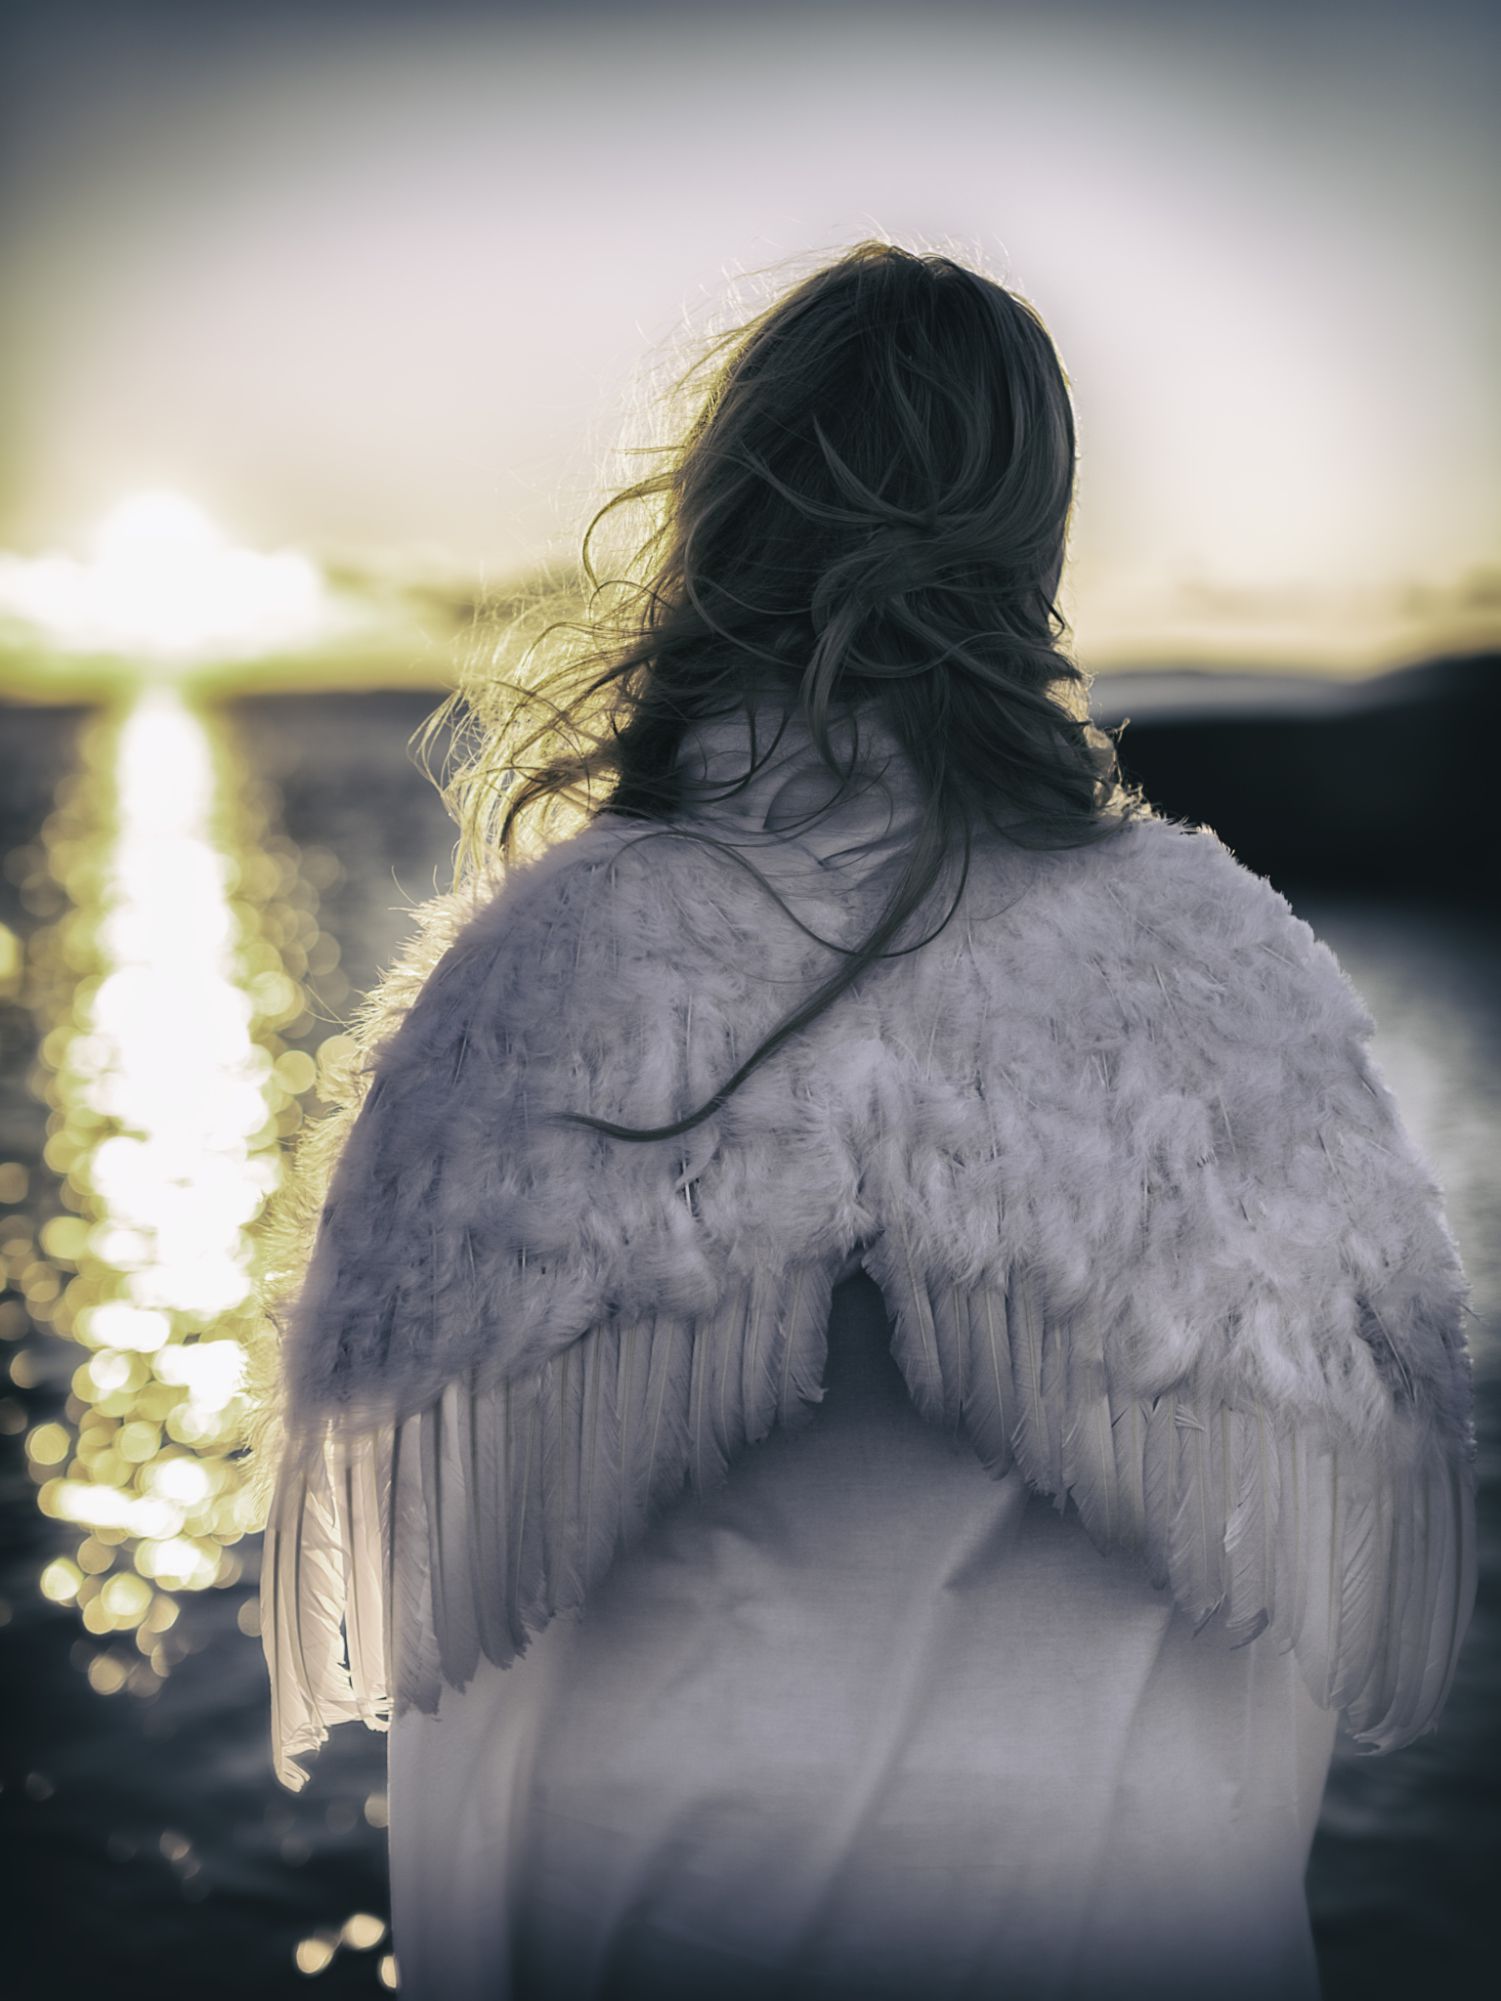 How Your Guardian Angel May Send You Visual Messages